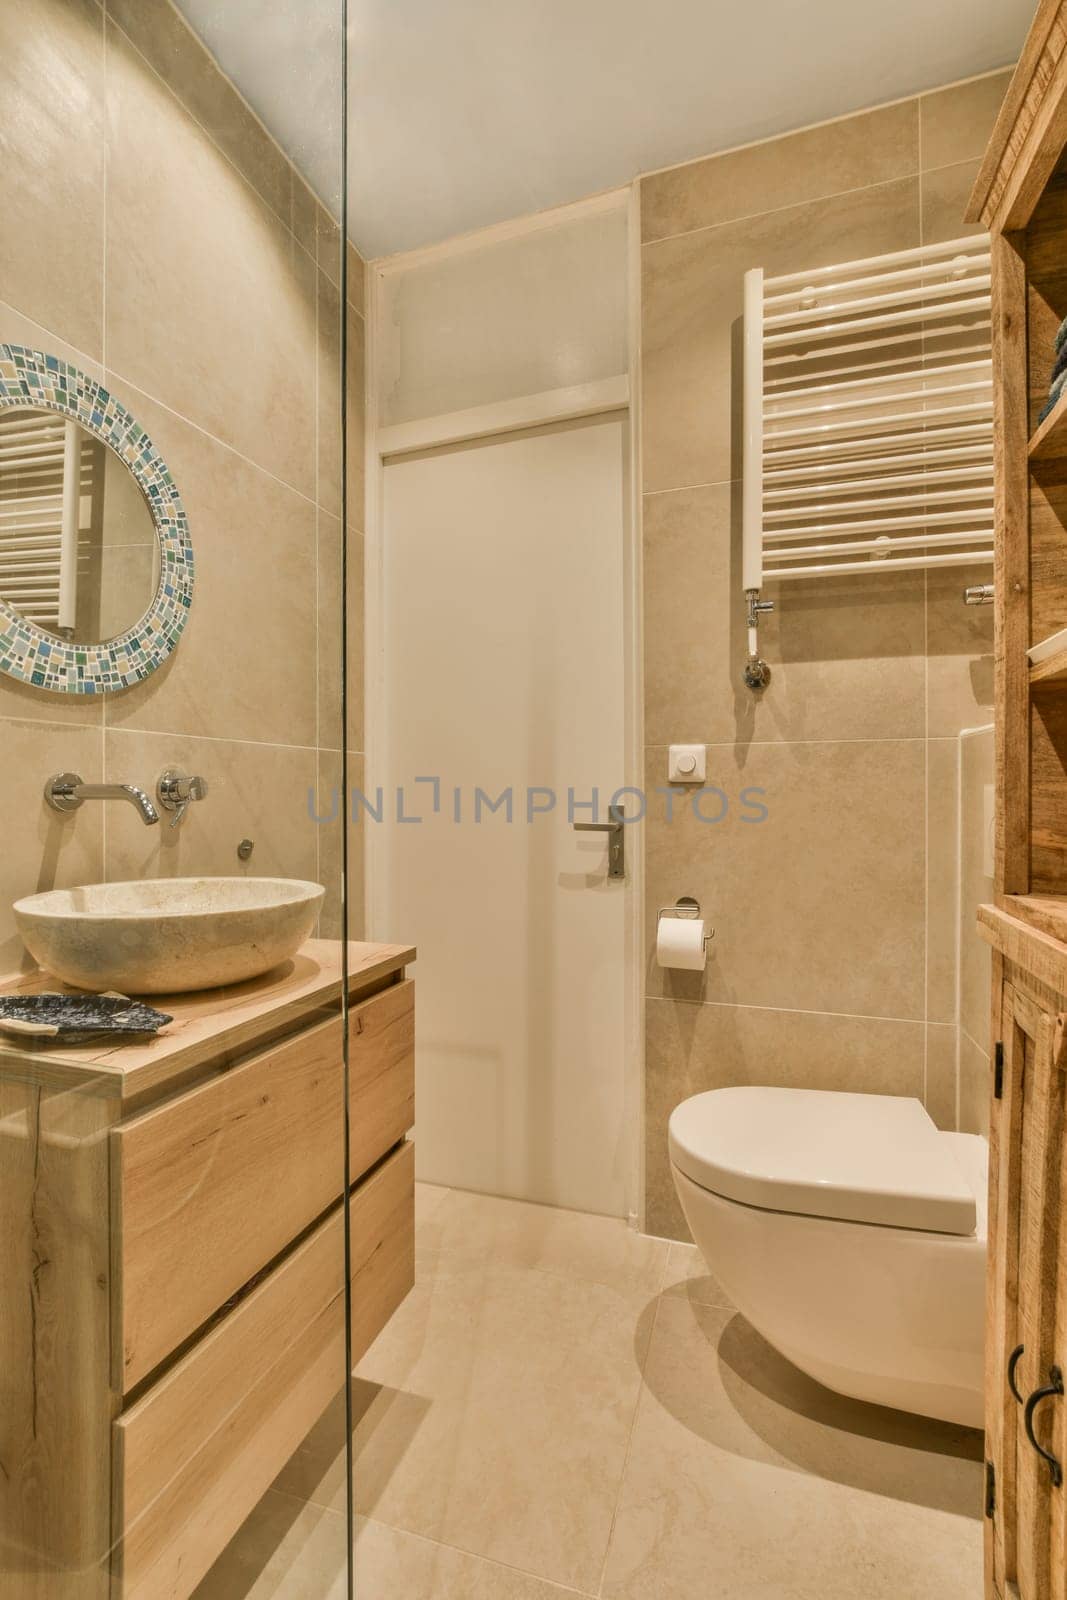 a bathroom with a toilet, sink and mirror on the wall next to it is a wooden cabinet that has been used for storage